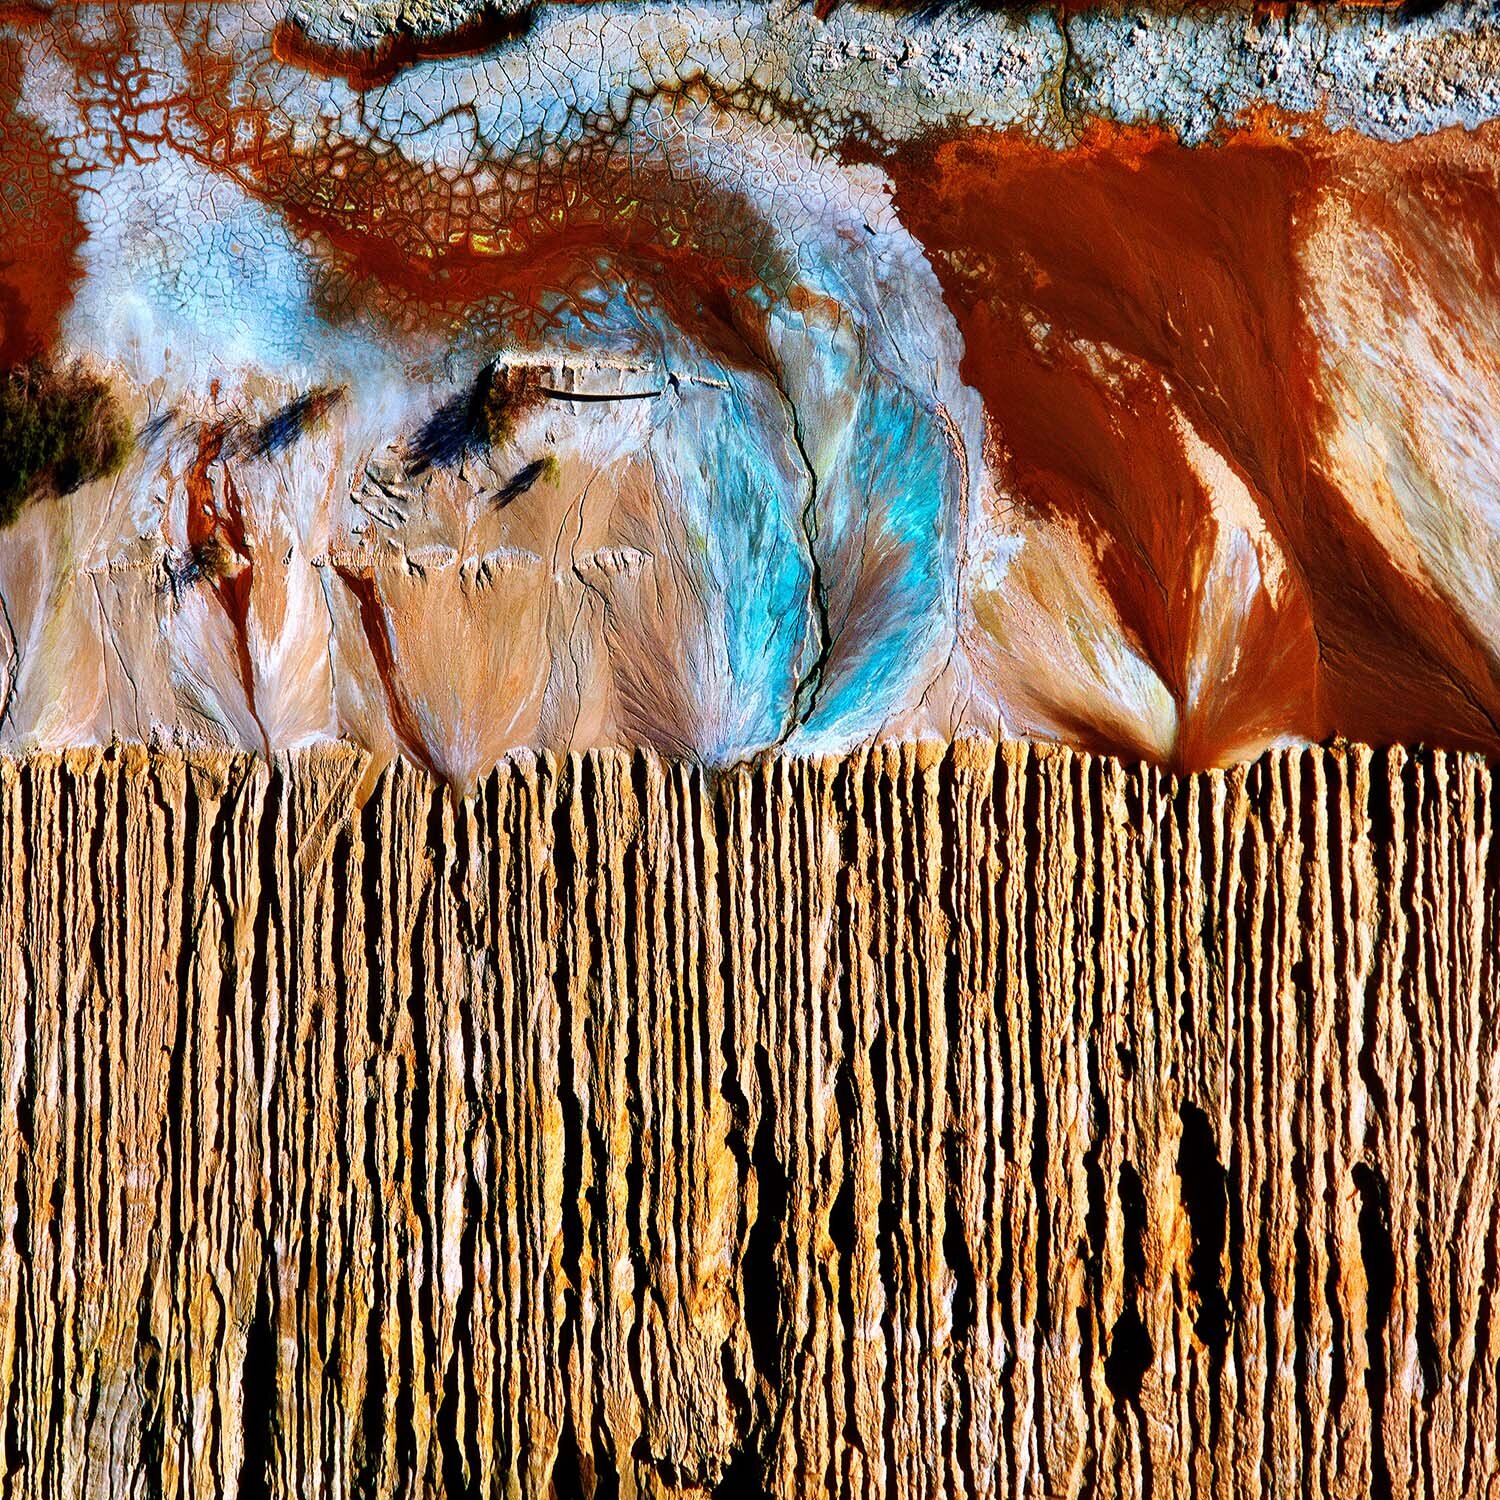 Copper Mine Tailing Pile Abstraction #1, Winkleman, Arizona